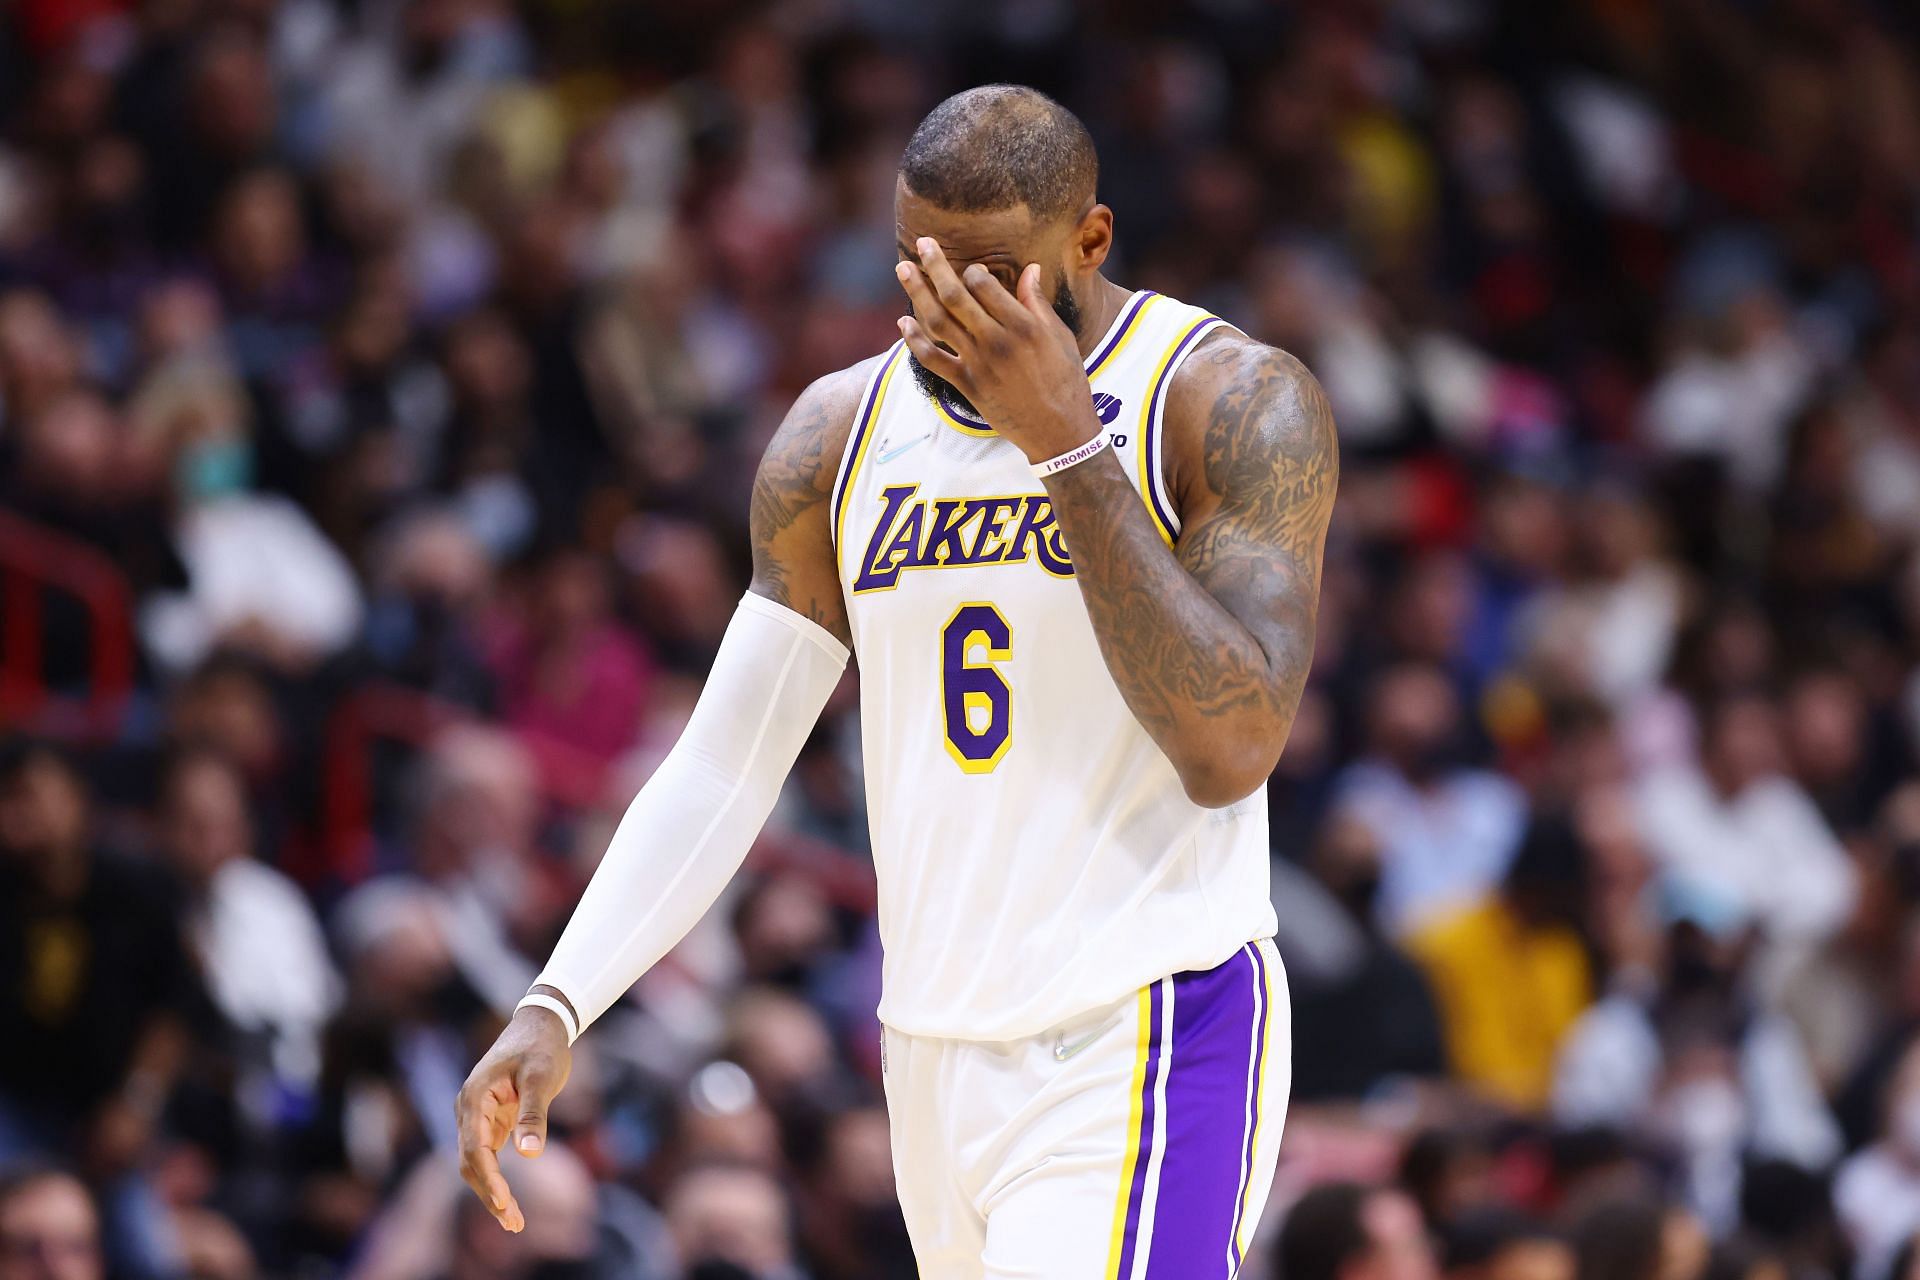 LeBron James addressed questions regarding his workload after the Lakers game